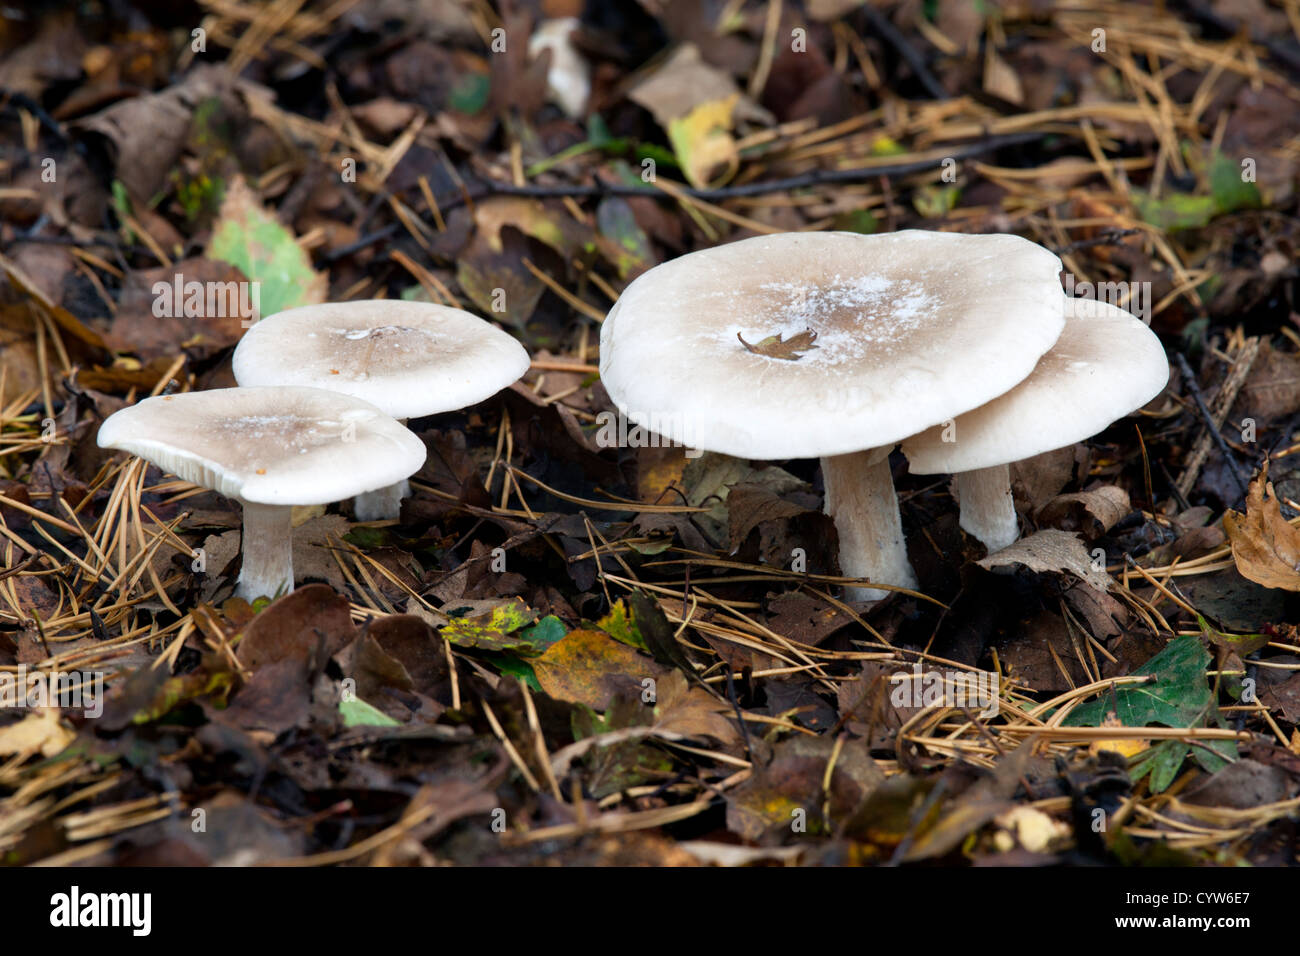 Clouded Funnel (Agaric) Clitocybe nebularis fungi fruiting bodies growing in leaf litter Stock Photo